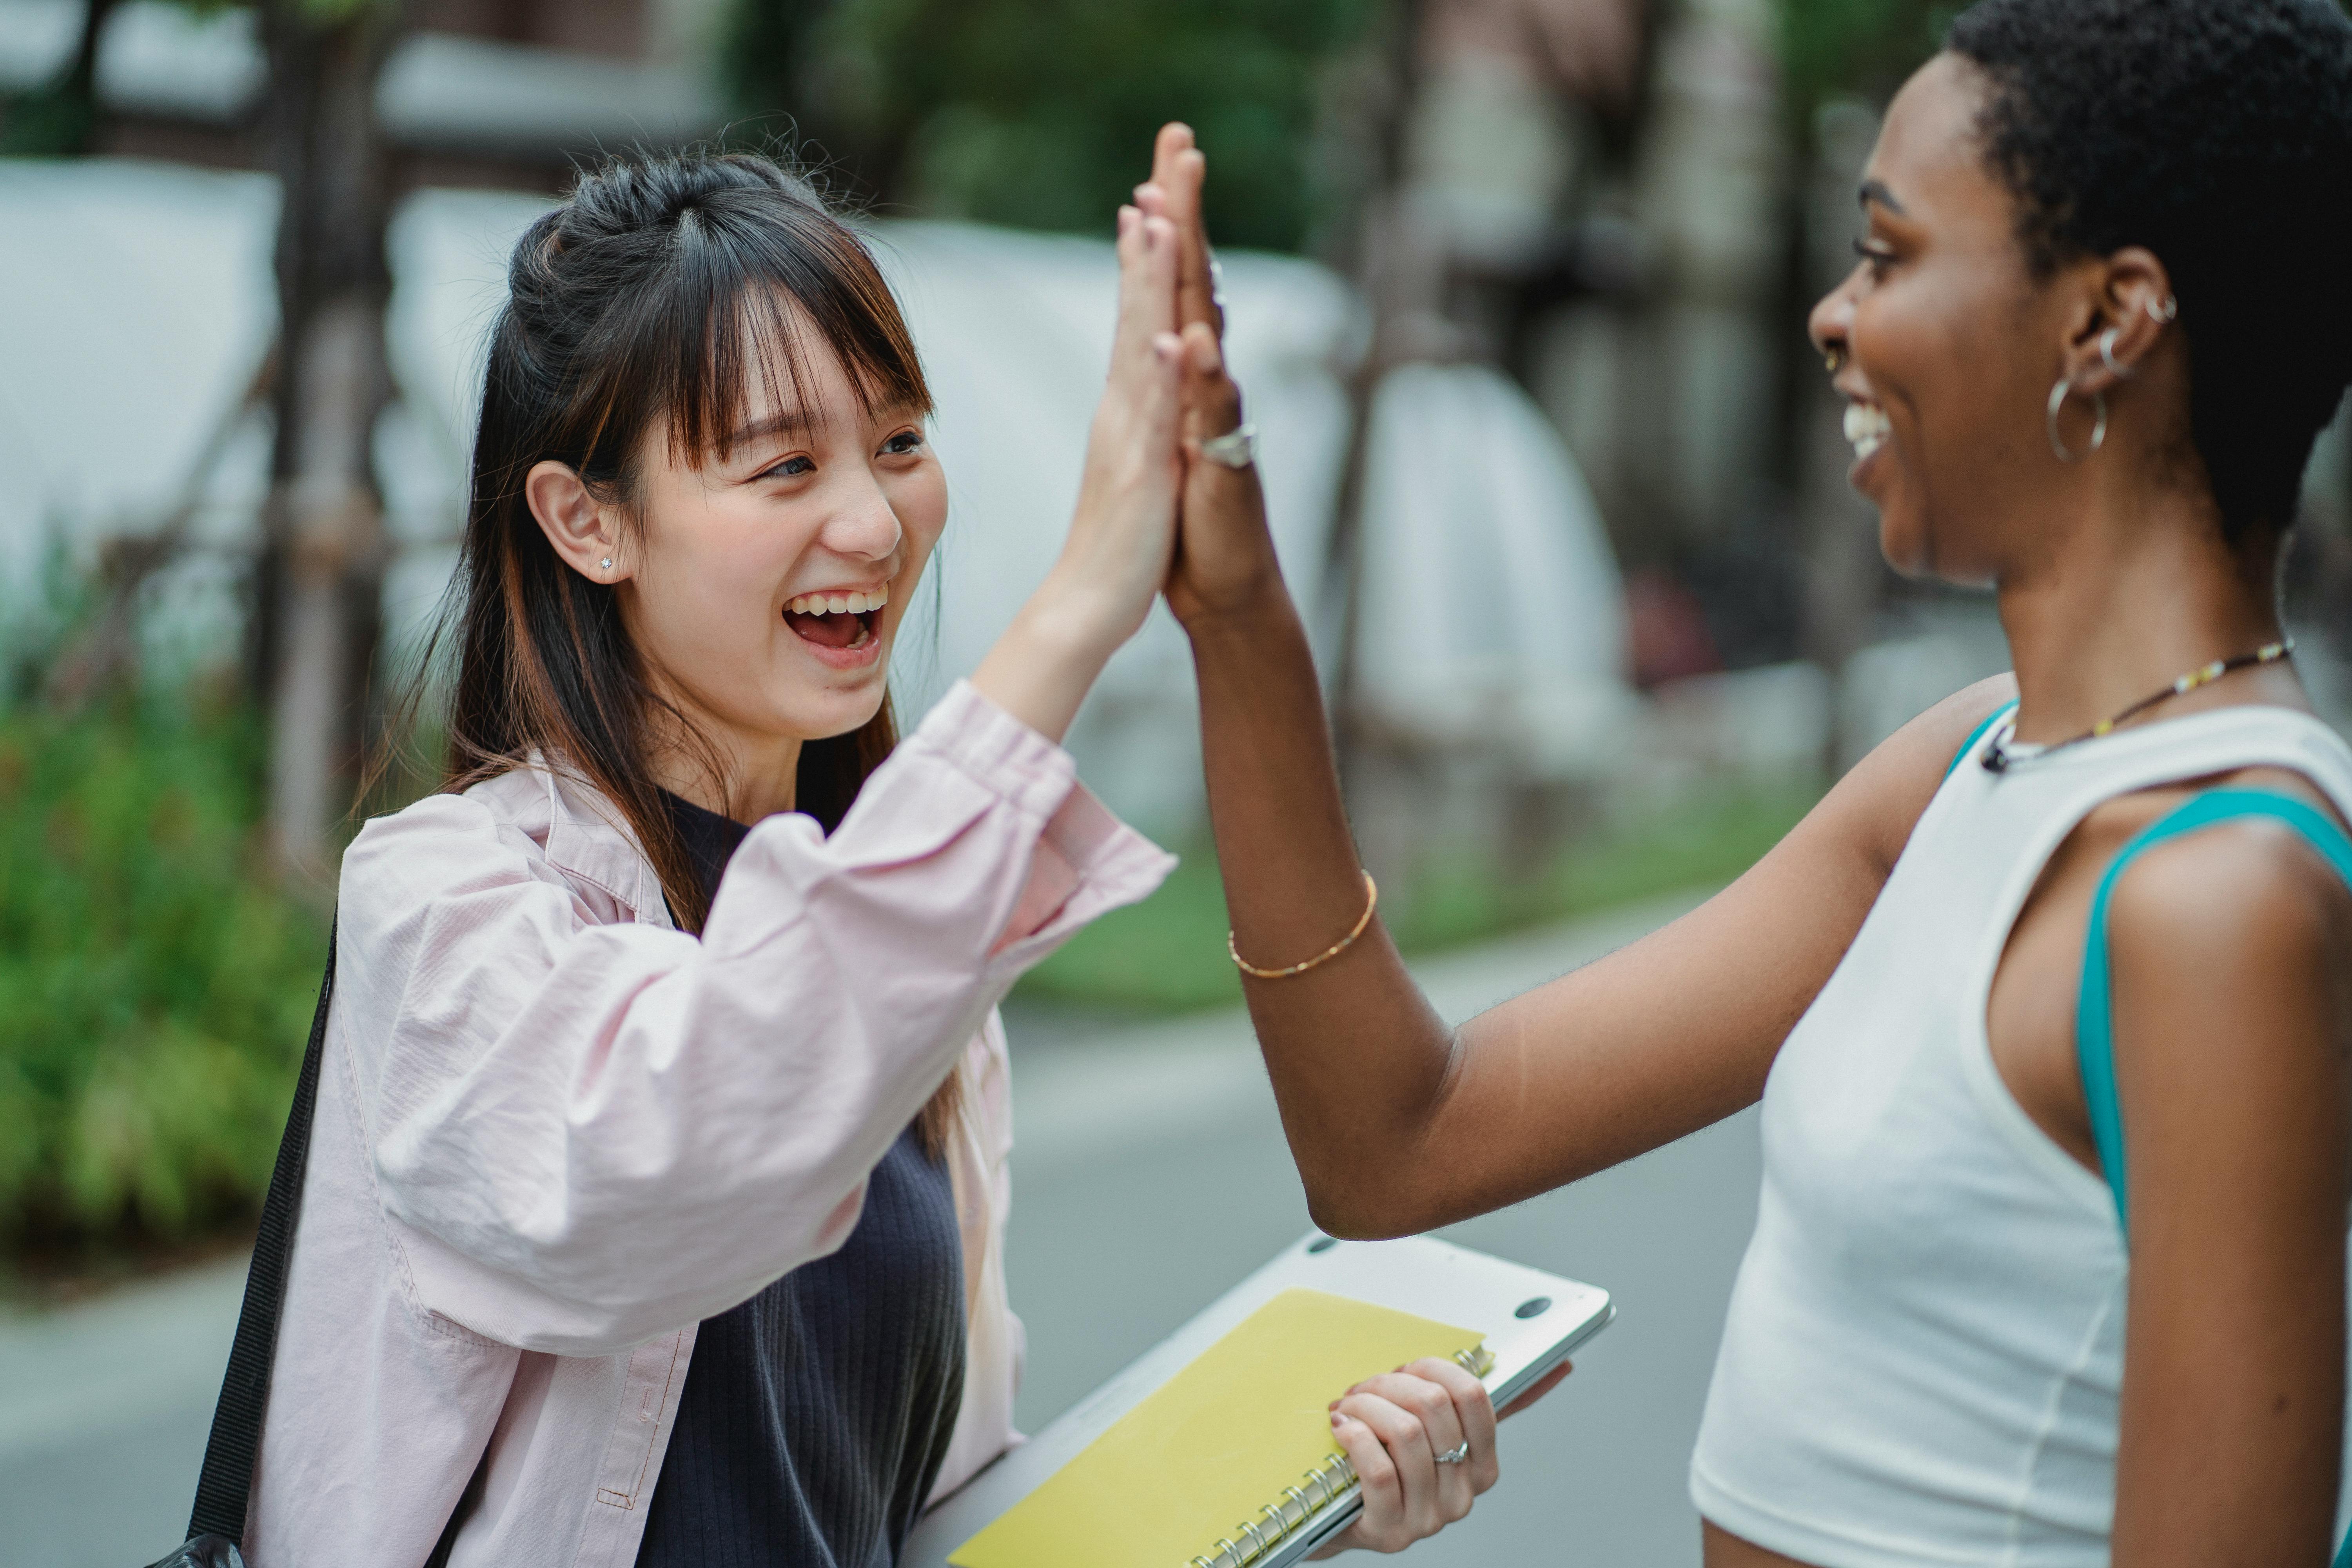 joyful diverse students giving high five in park